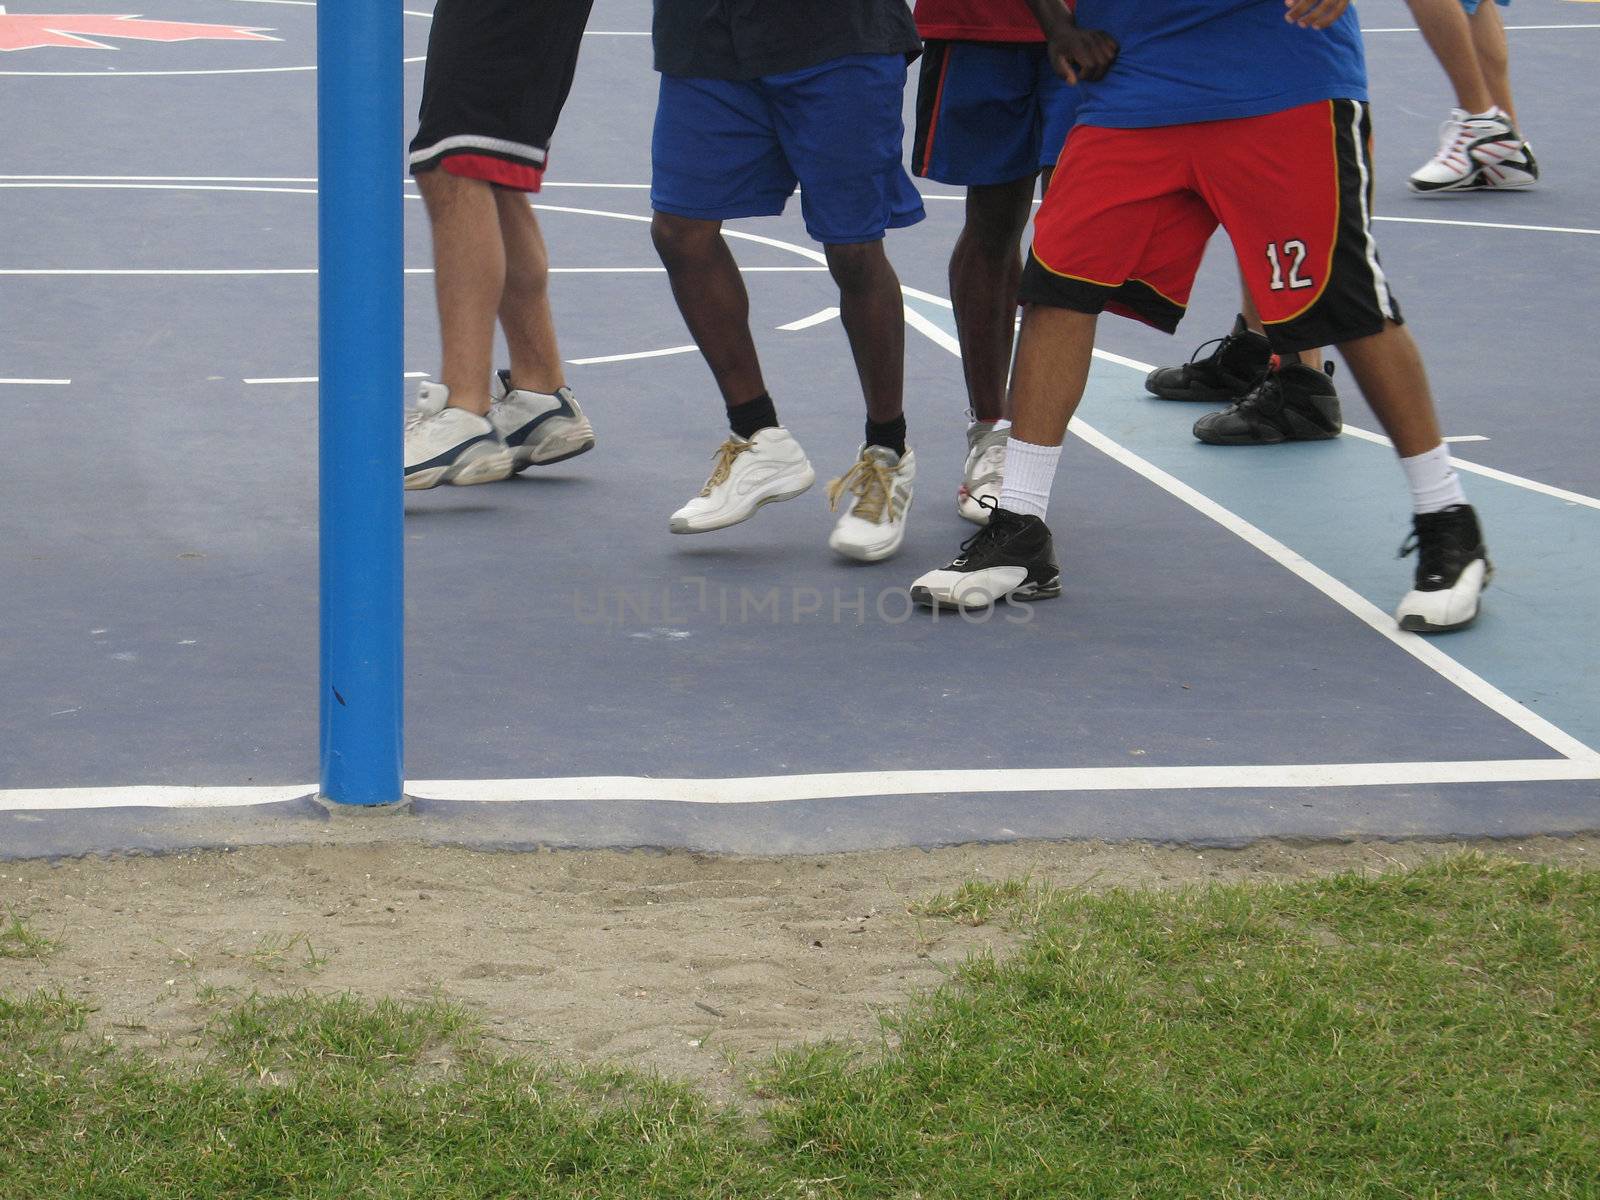 basketball players on a court